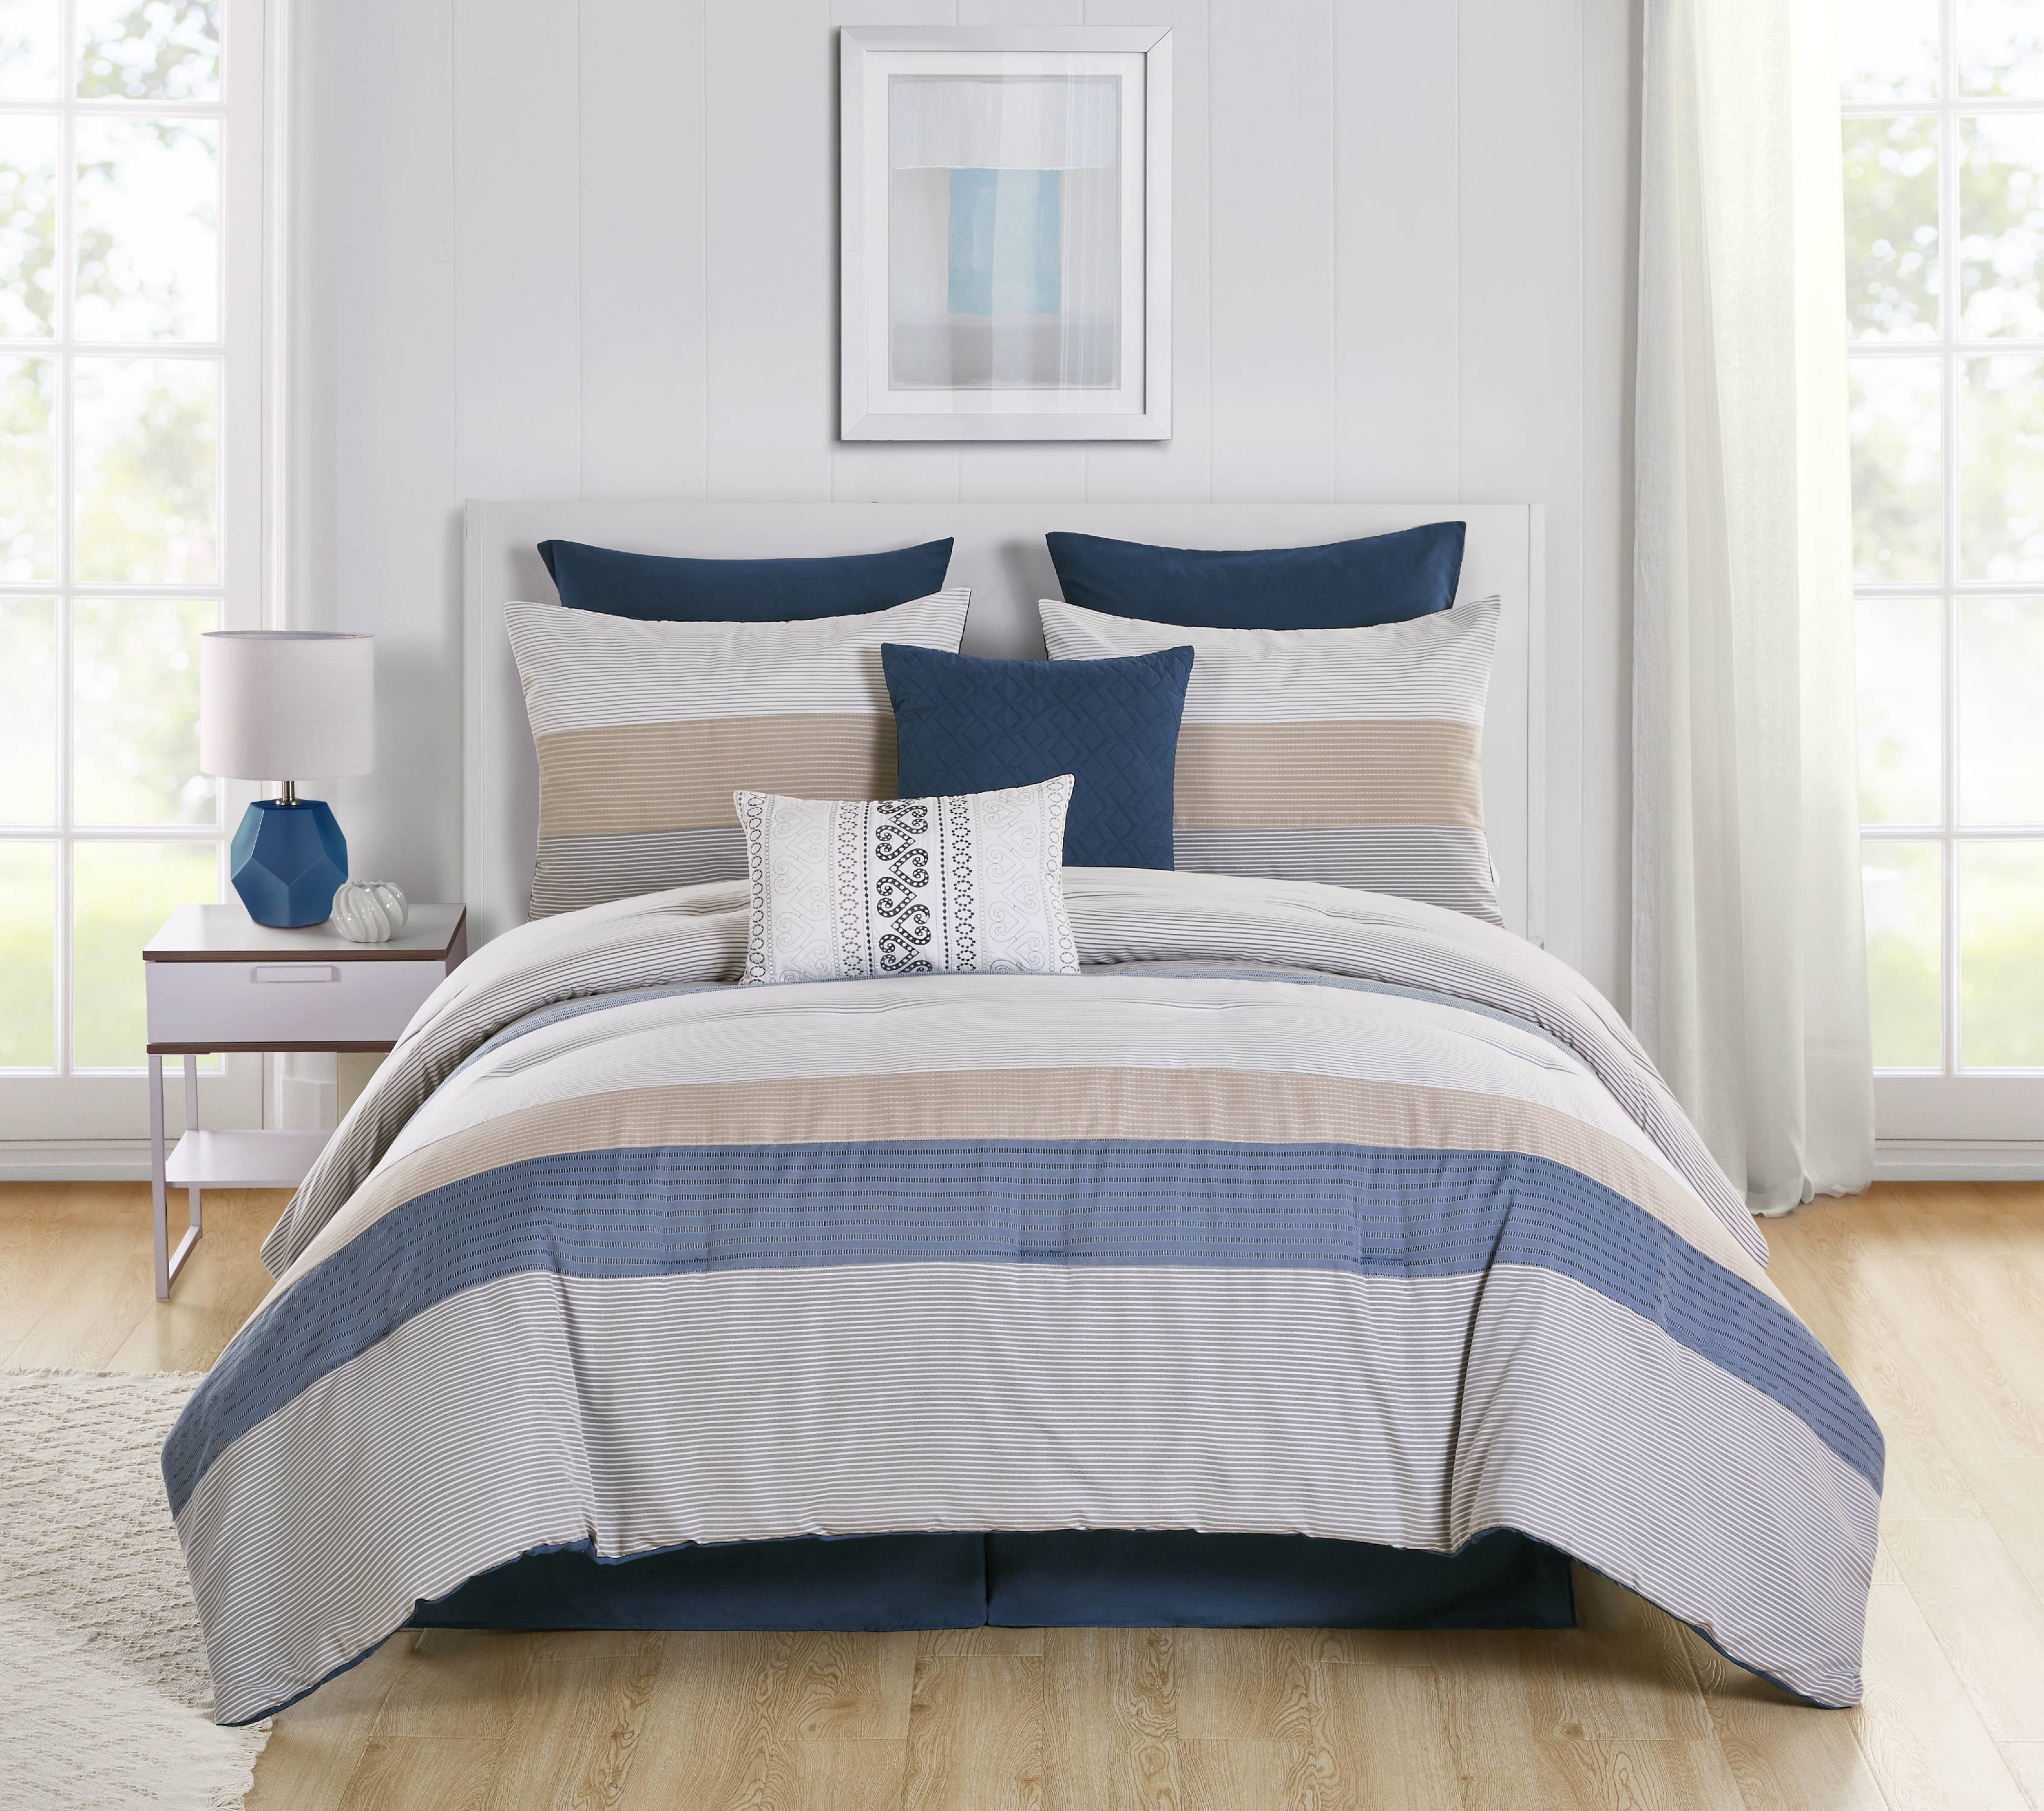 Vcny Home Drover Stripe Blue And Beige Comforter Set Queen Multi